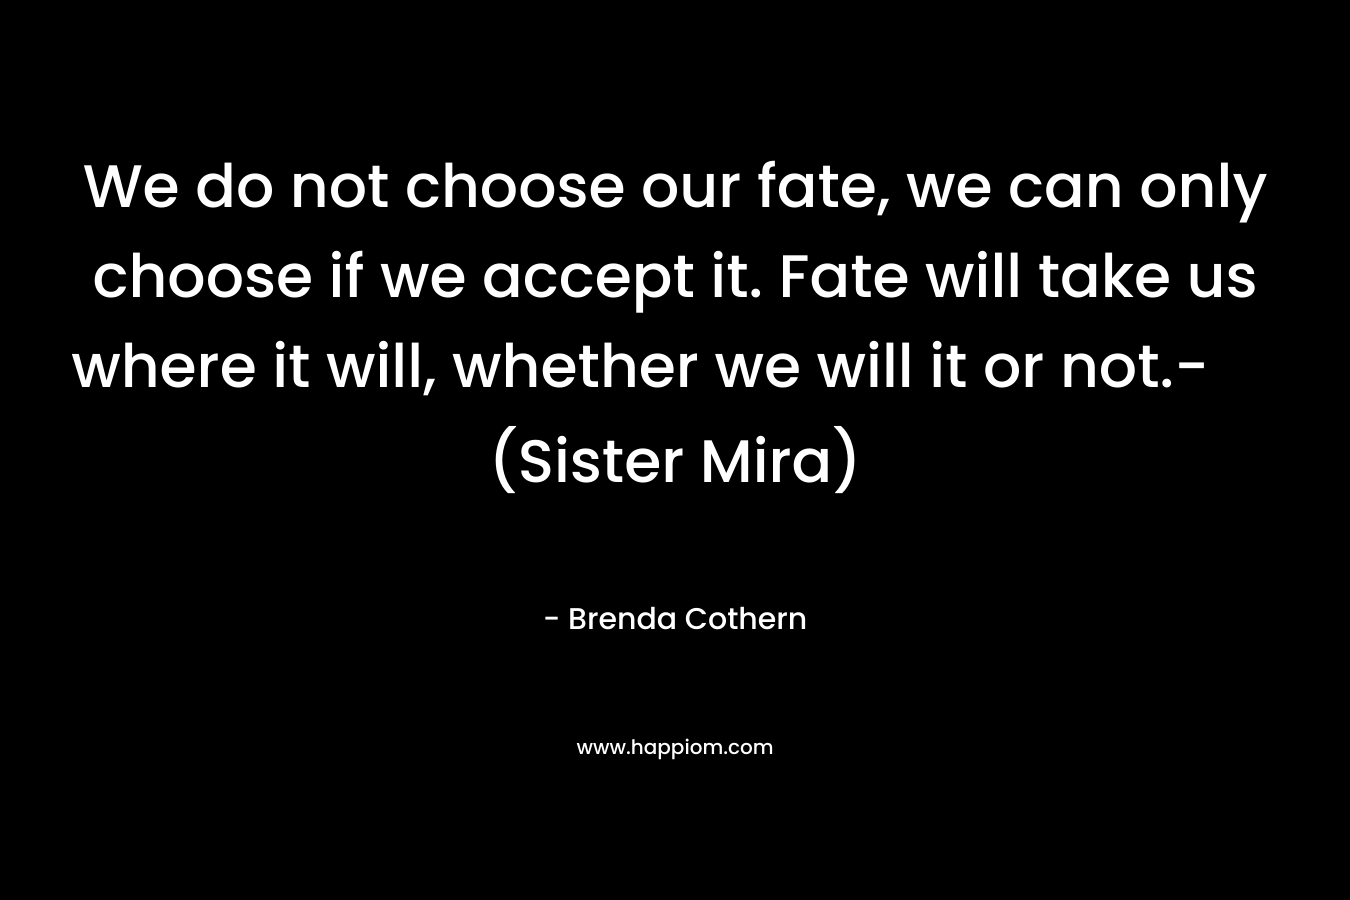 We do not choose our fate, we can only choose if we accept it. Fate will take us where it will, whether we will it or not.- (Sister Mira)